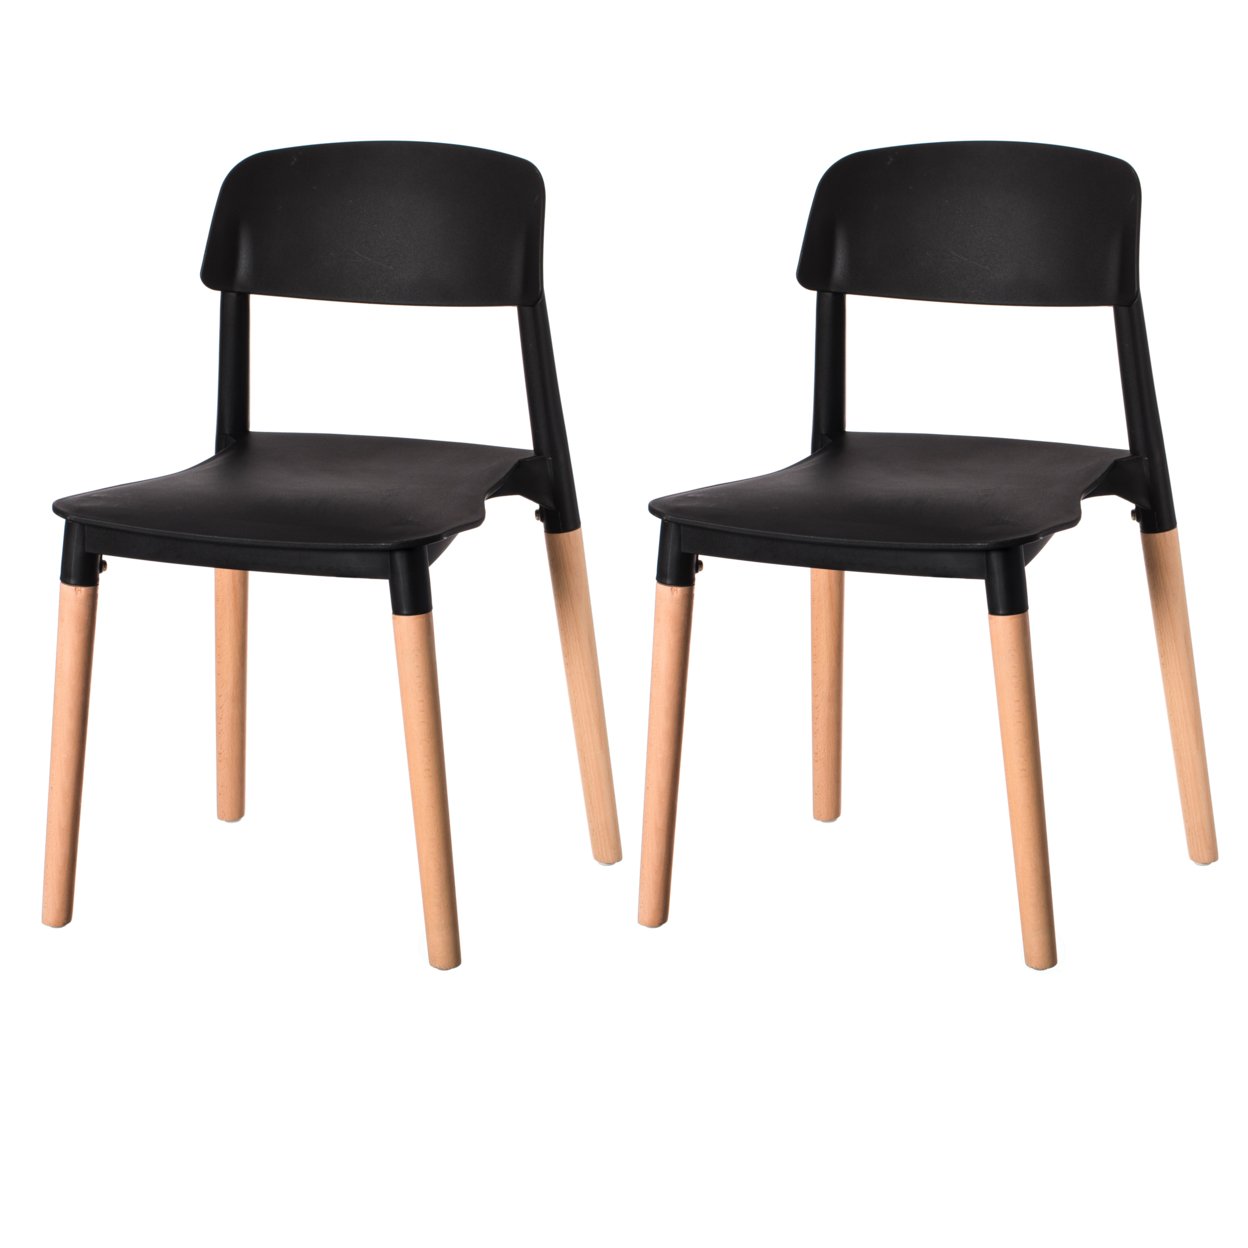 Modern Plastic Dining Chair Open Back With Beech Wood Legs - Single Black